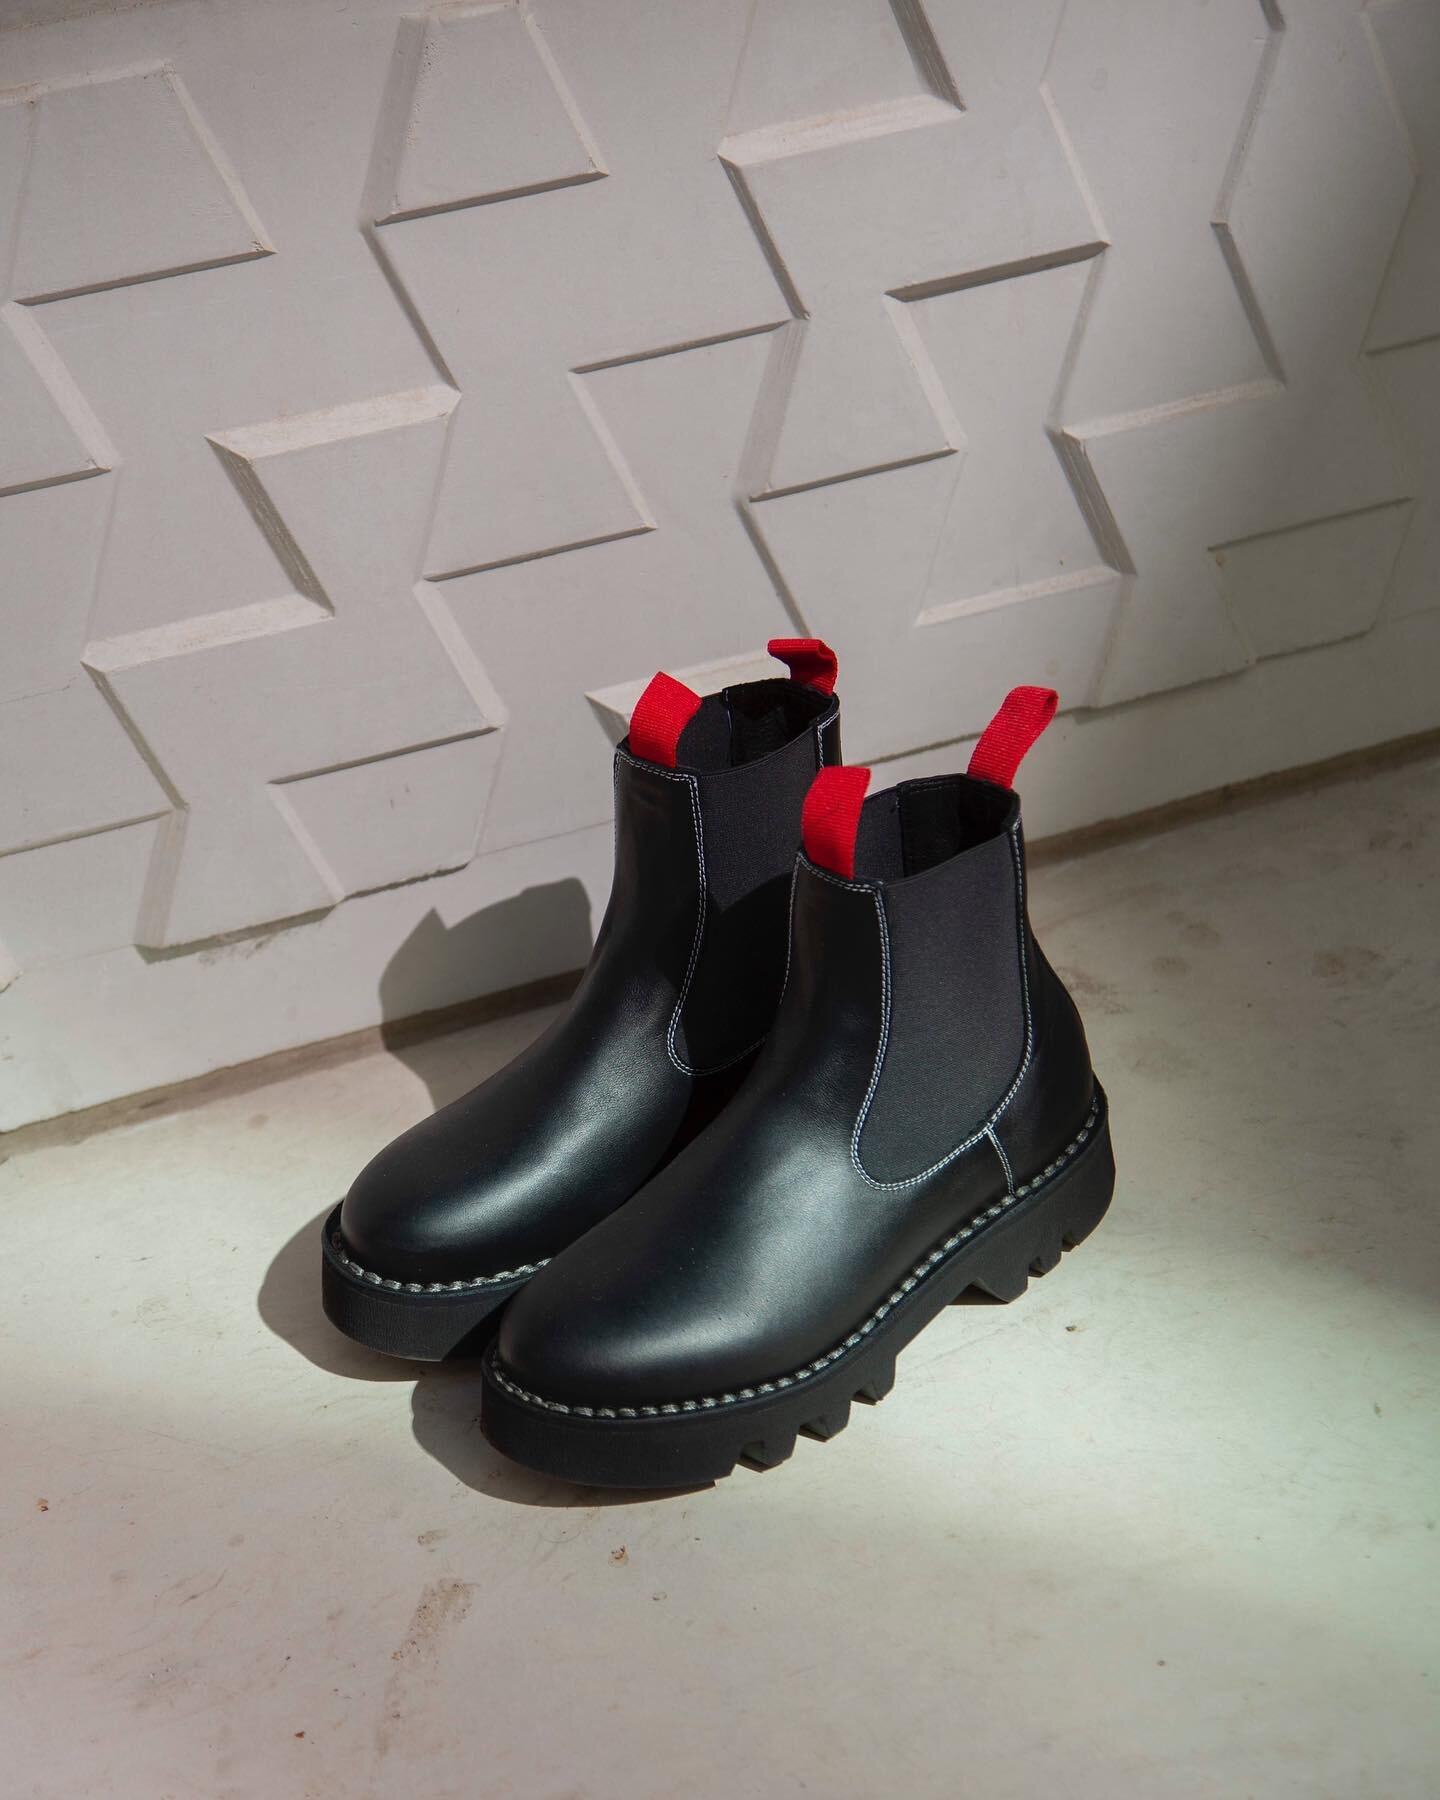 SOFIE D&rsquo;HOORE / Two different takes on a classic chelsea boot style: Sofie d&rsquo;Hoore&rsquo;s Faro and Foal boots are back in store for fall! We take online orders through email, just send us a message at shop@jonesarnhem.com for more inform